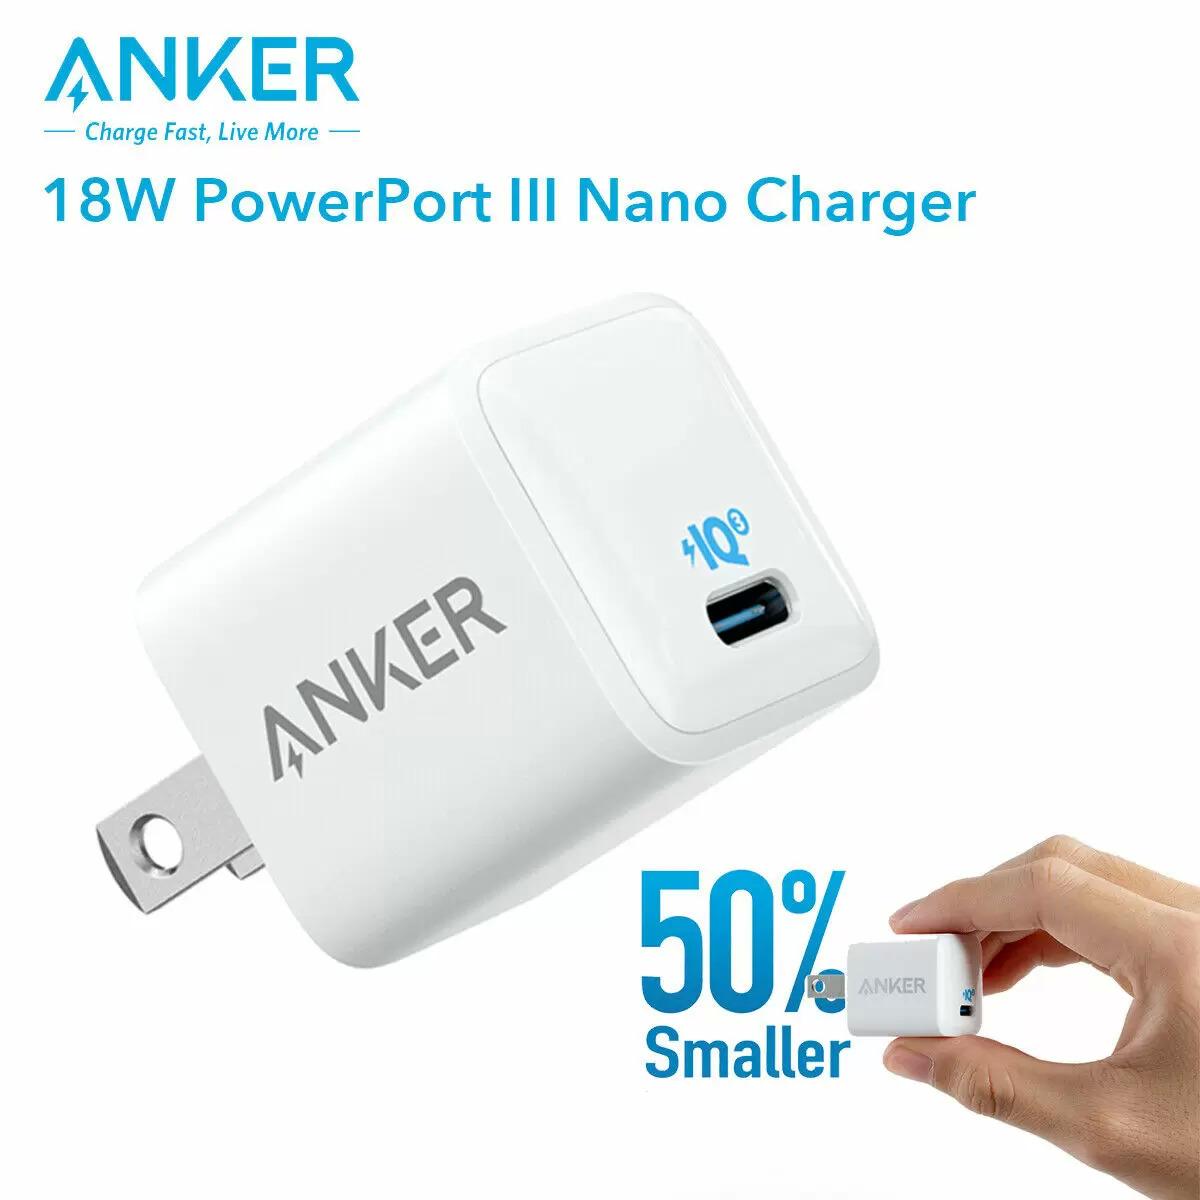 Anker 18W USB C Nano Charger for $8.99 Shipped